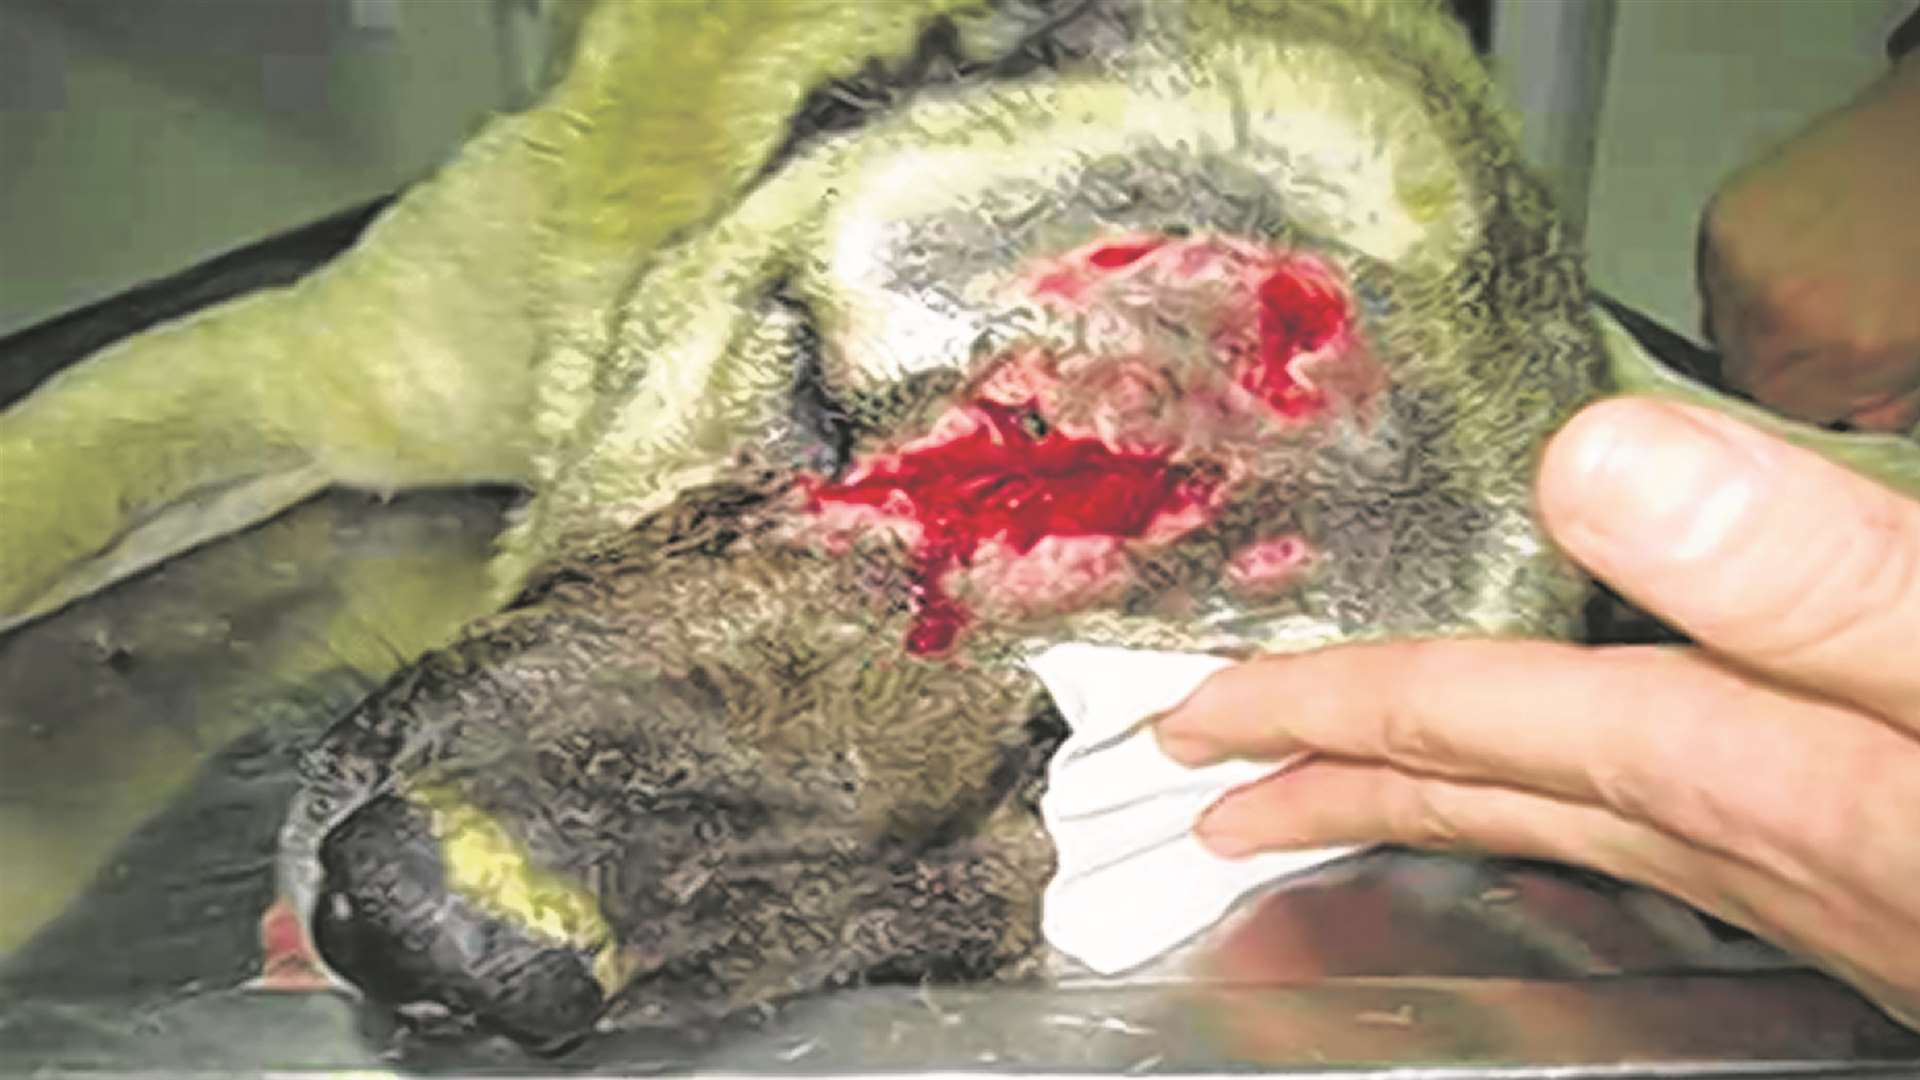 This picture shows the horrific wounds suffered by Celina.